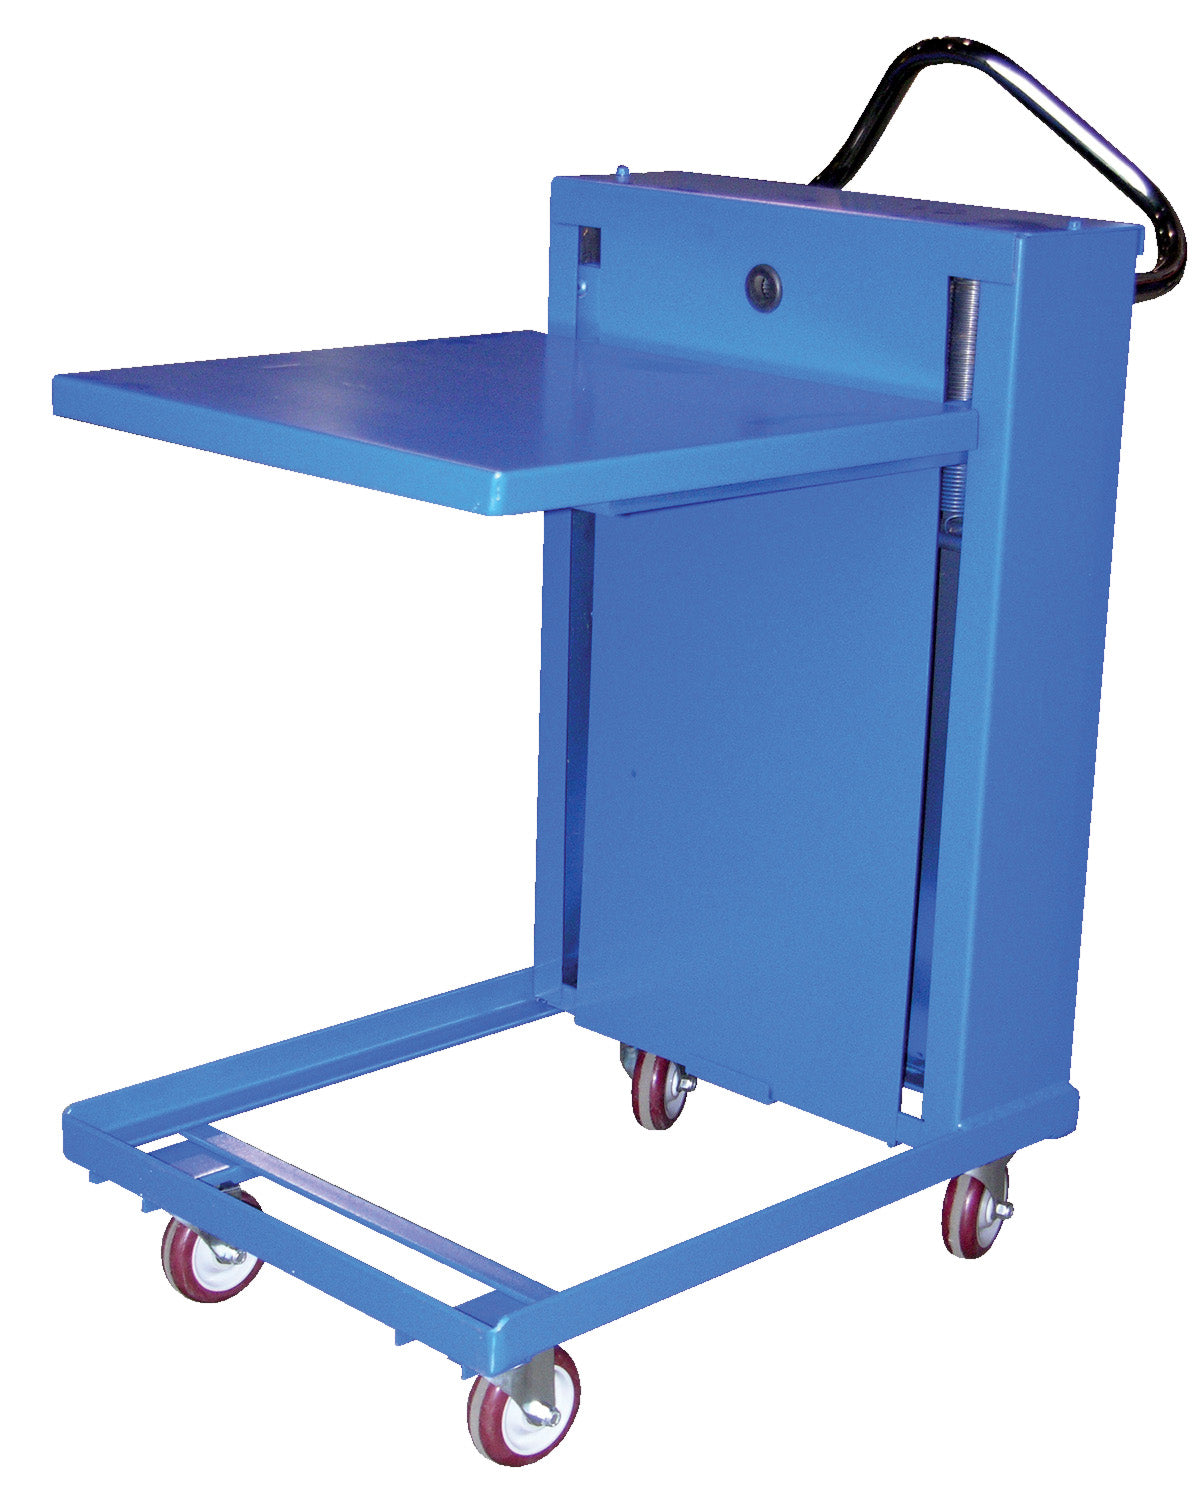 20" x 20" Self-Elevating Spring Table w/ 460-lbs Capacity